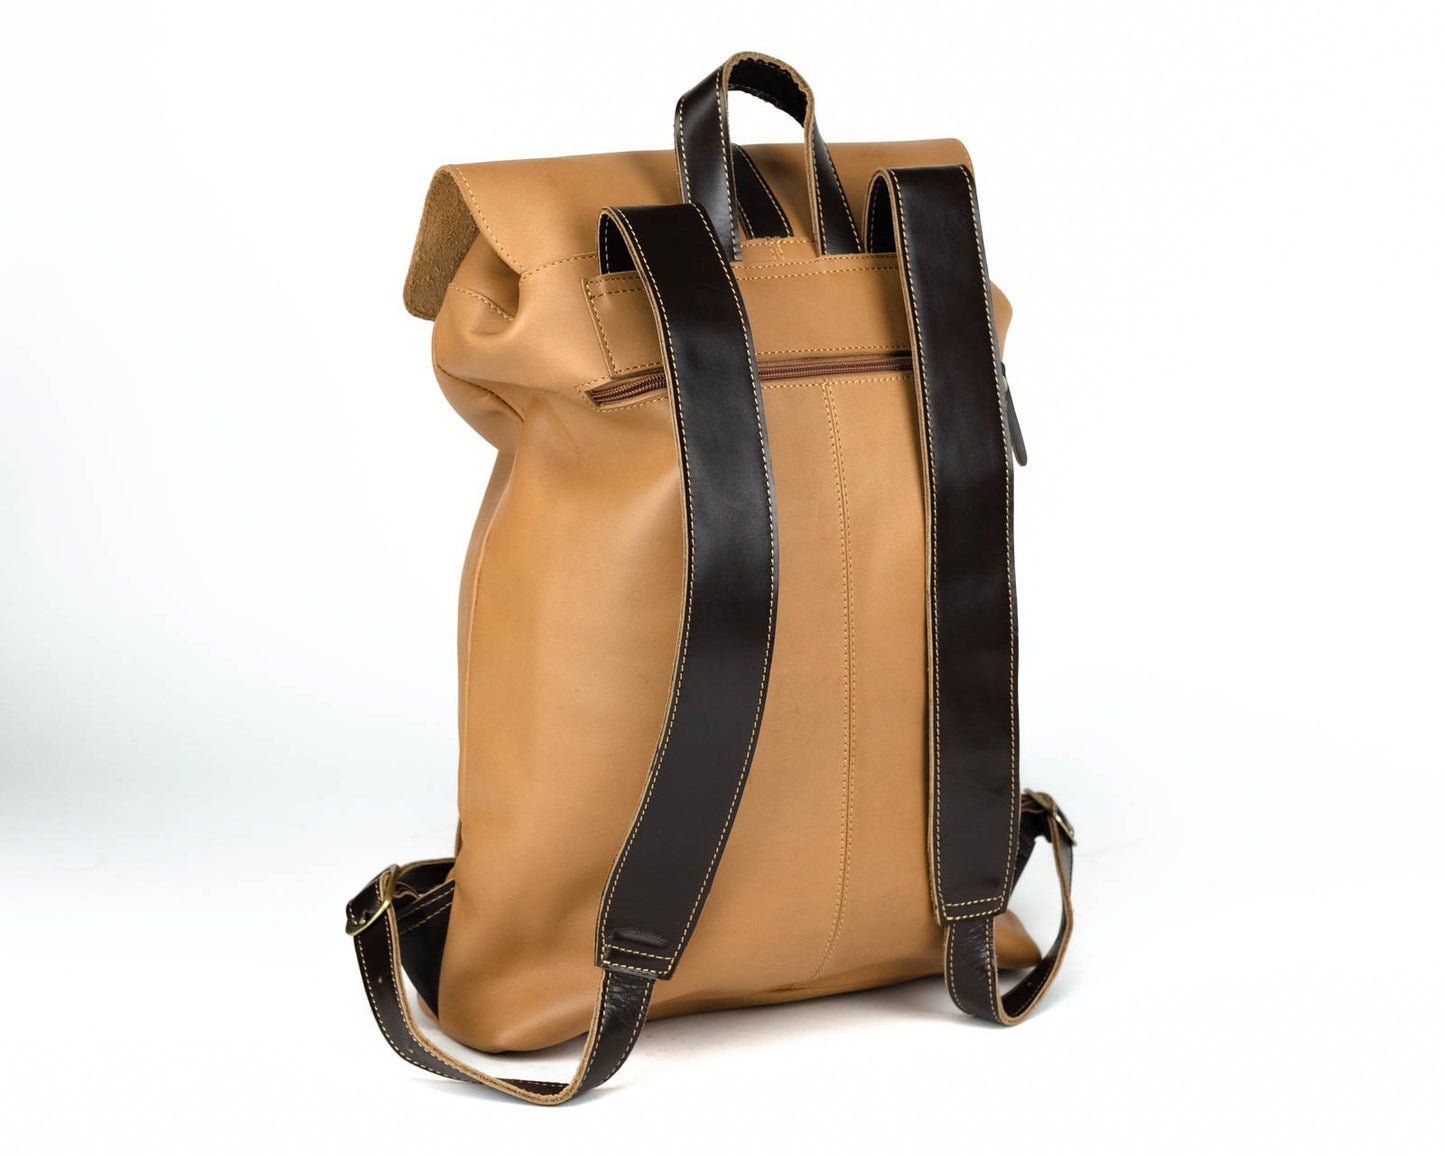 Griffin Backpack